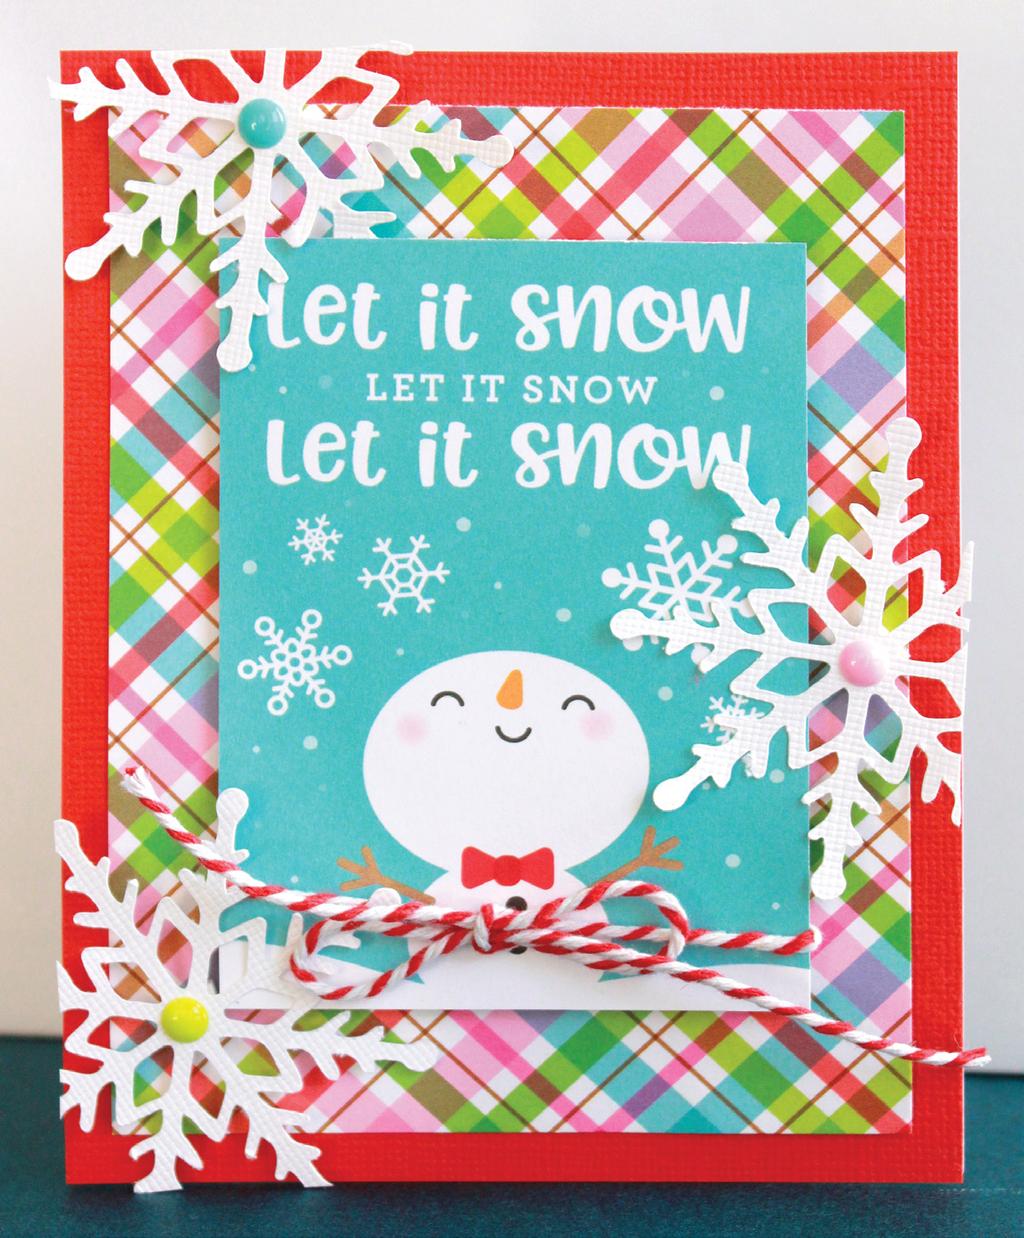 step-by-step card instructions LET IT SNOW CARD (4.25x5.5) 1 Trim a 8.5 x 5.5 piece of Lava cardstock. Score at center of long side and fold to create a 4.25 x 5.5 card base with opening to the right.